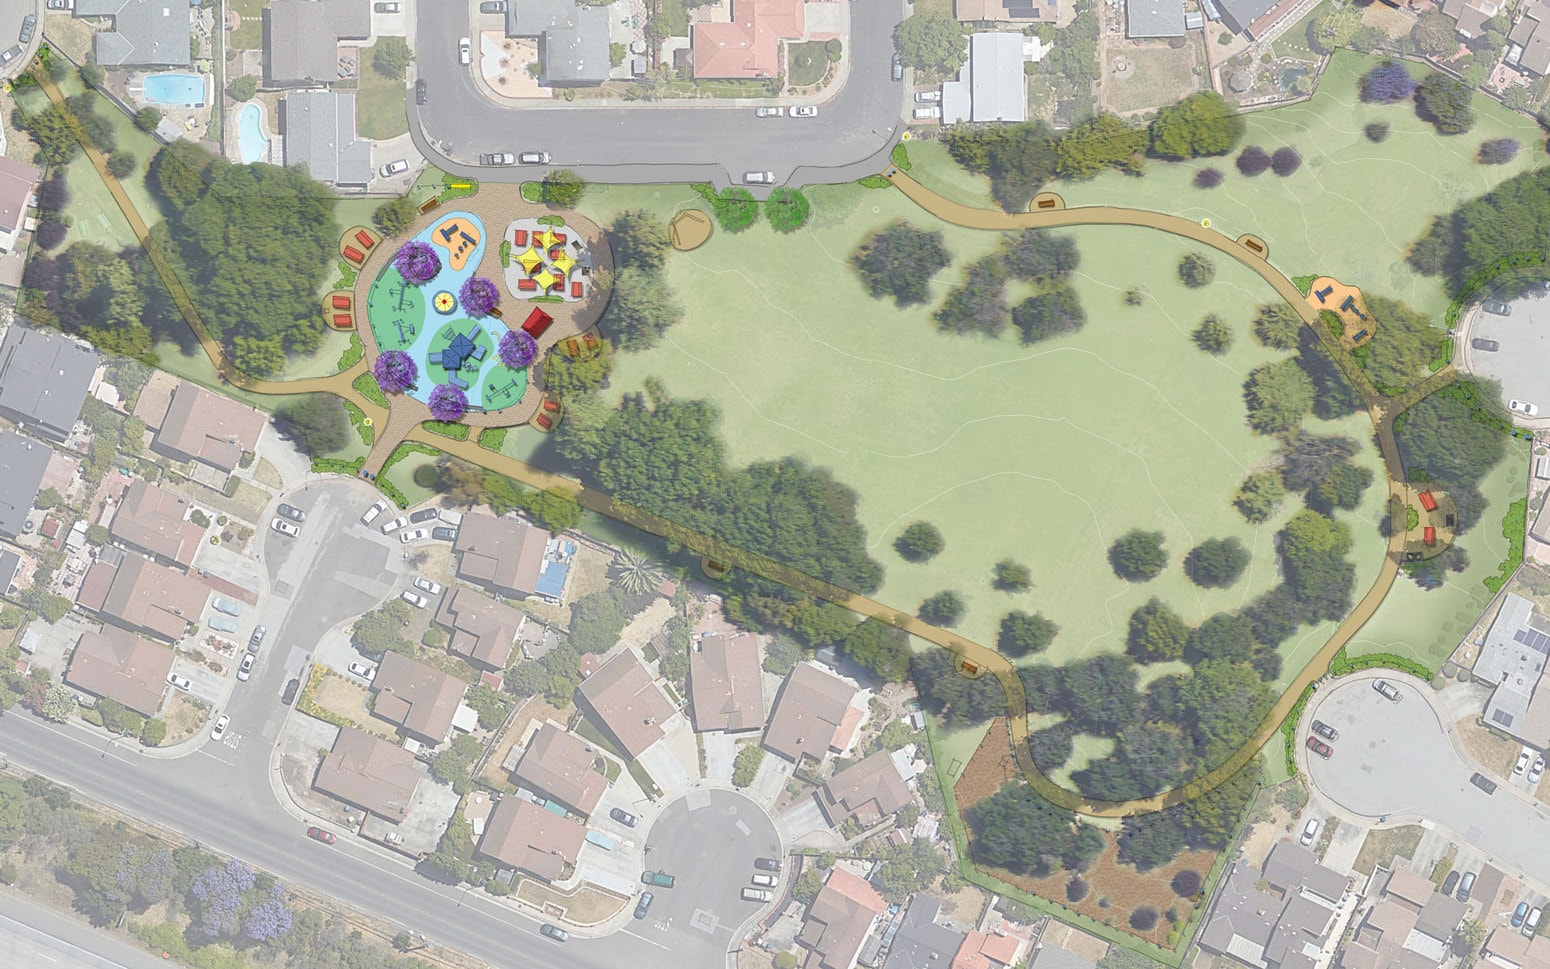 Site plan rendering of the park and play area